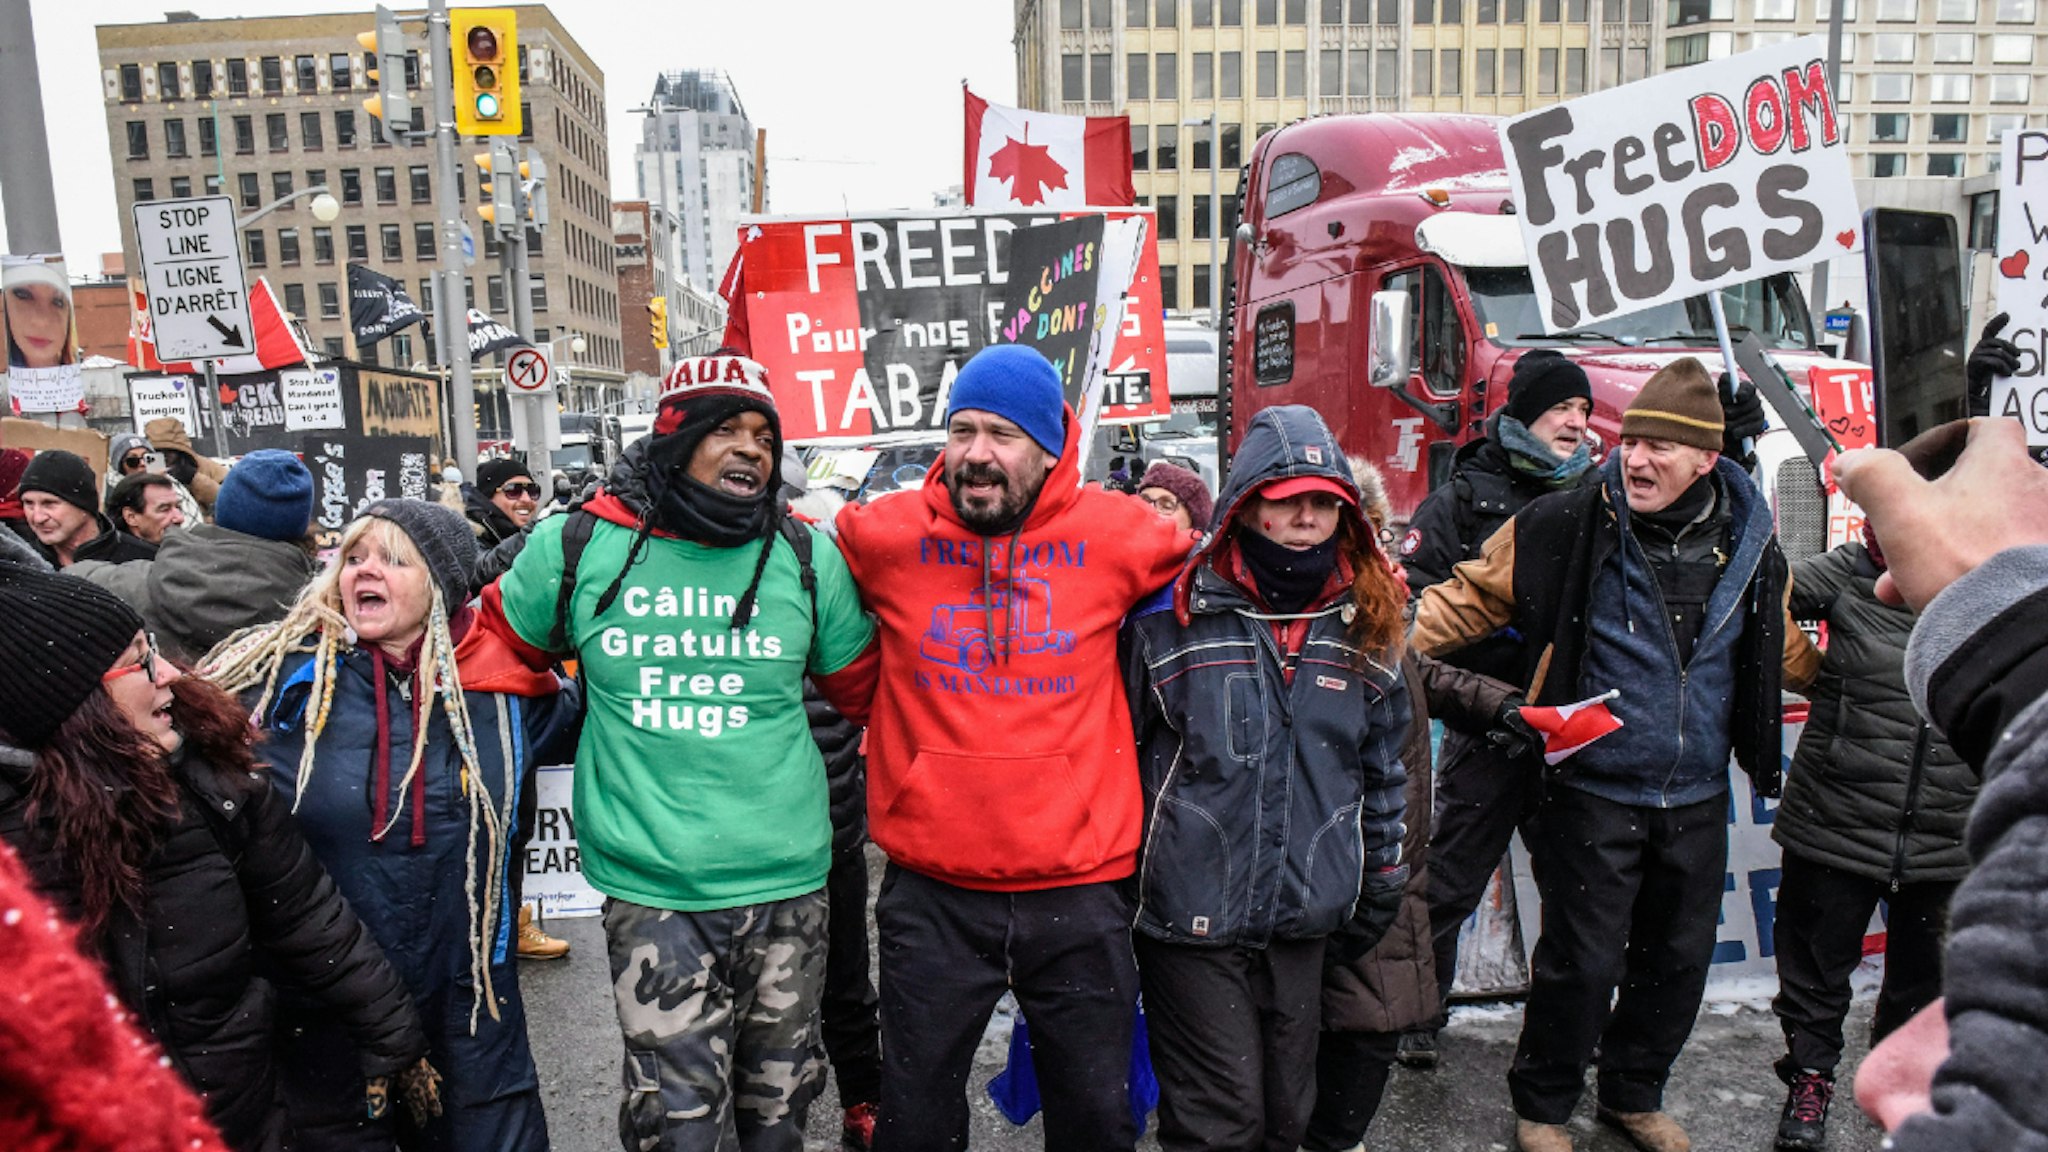 Protesters during a demonstration near Parliament Hill in Ottawa, Ontario, Canada, on Saturday, Feb. 12, 2022. The premier of Canada's biggest province declared a state of emergency, warning protesters choking off traffic at a key U.S. border crossing and causing gridlock in Canada's capital they face stiff punishment if they don't leave.